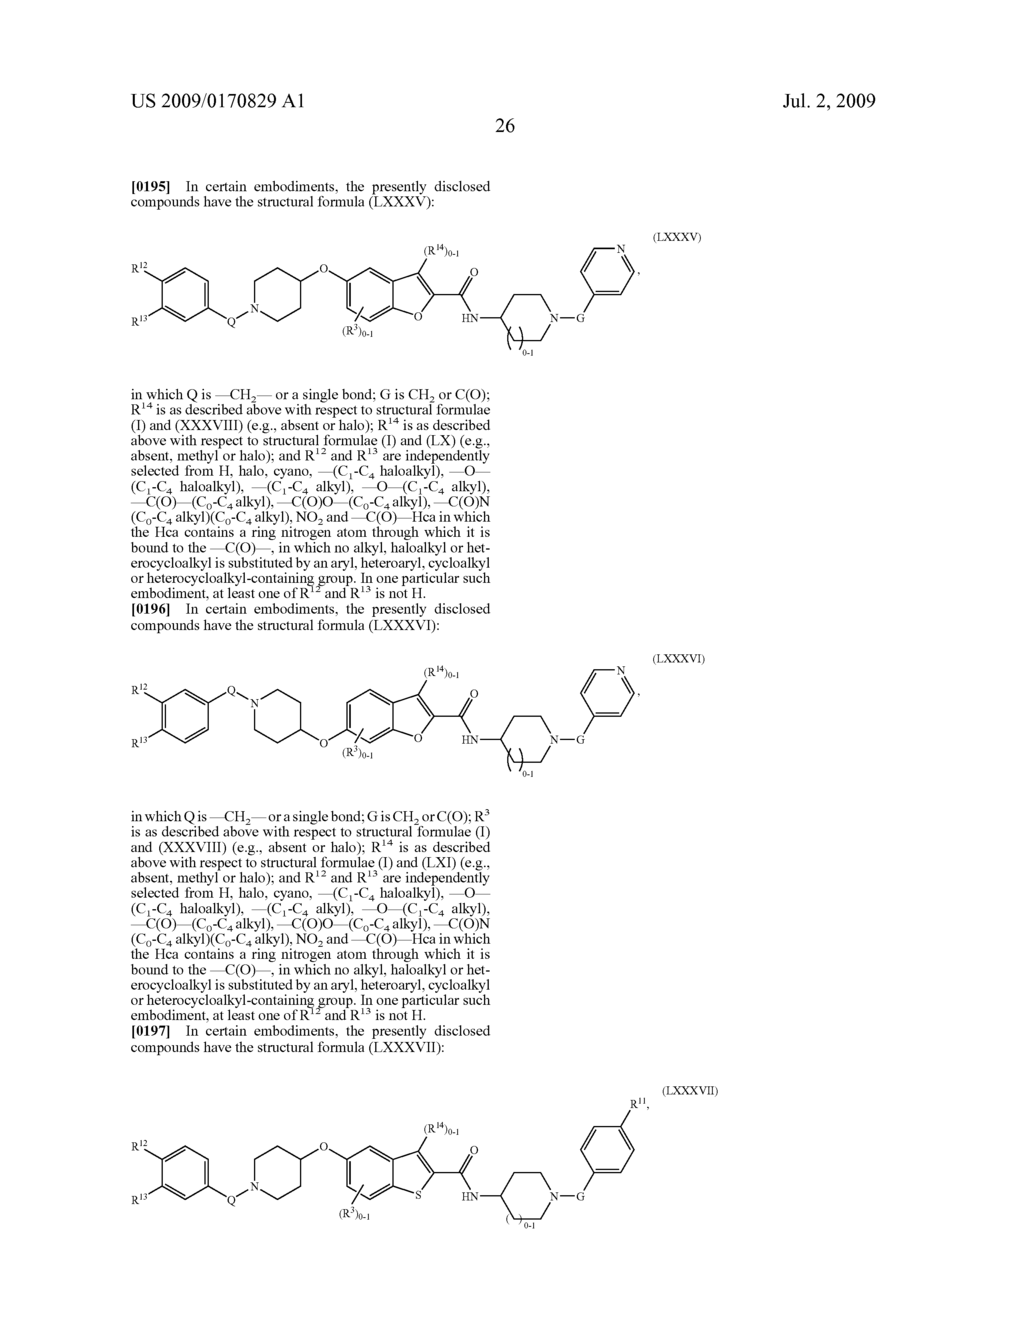 Carboxamide, Sulfonamide and Amine Compounds and Methods for Using The Same - diagram, schematic, and image 27